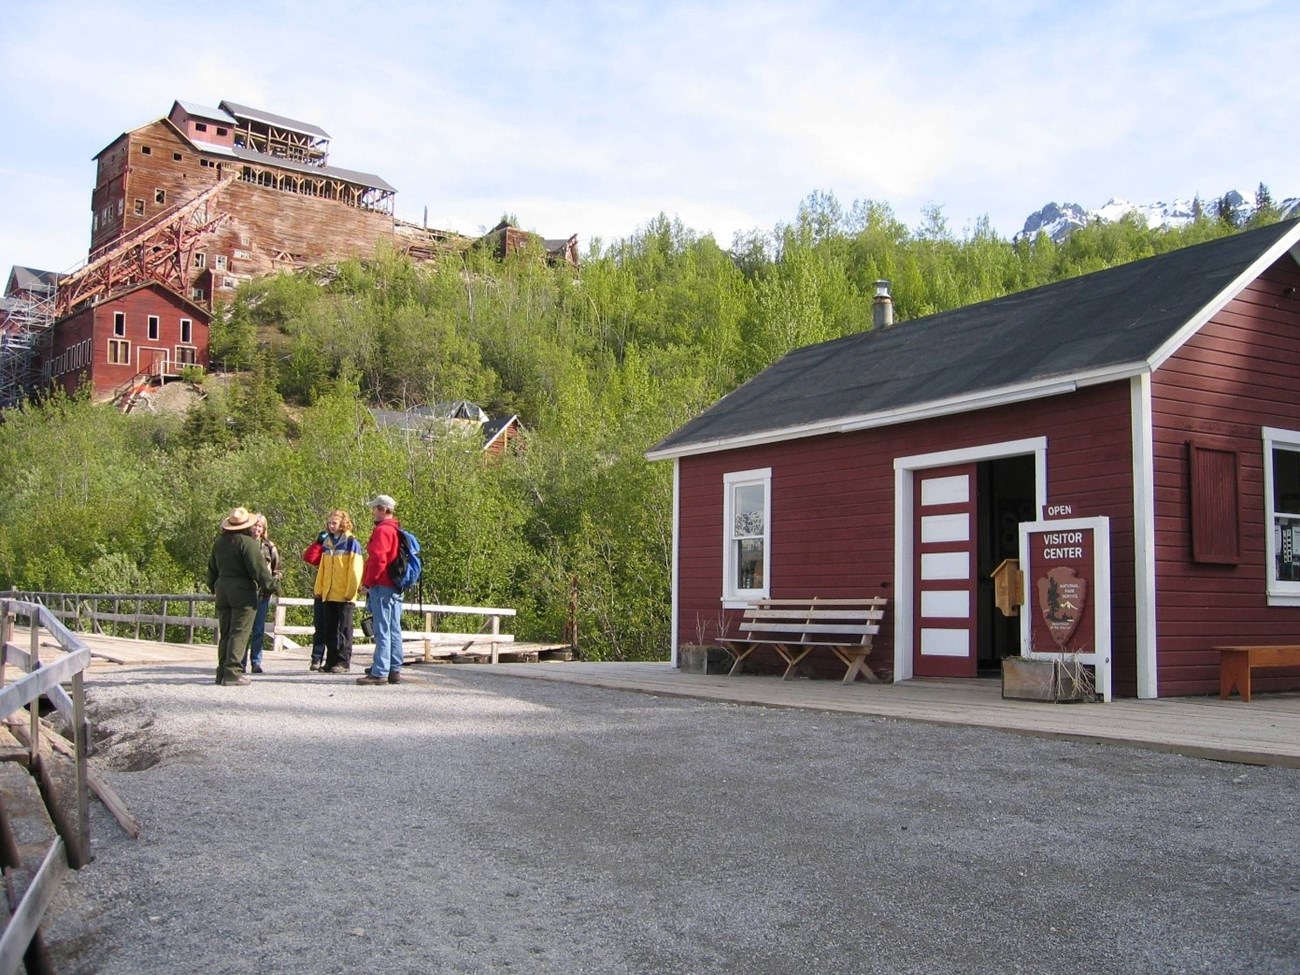 A ranger speaks to visitors at the National Creek bridge. Kennecott Mill in the background.